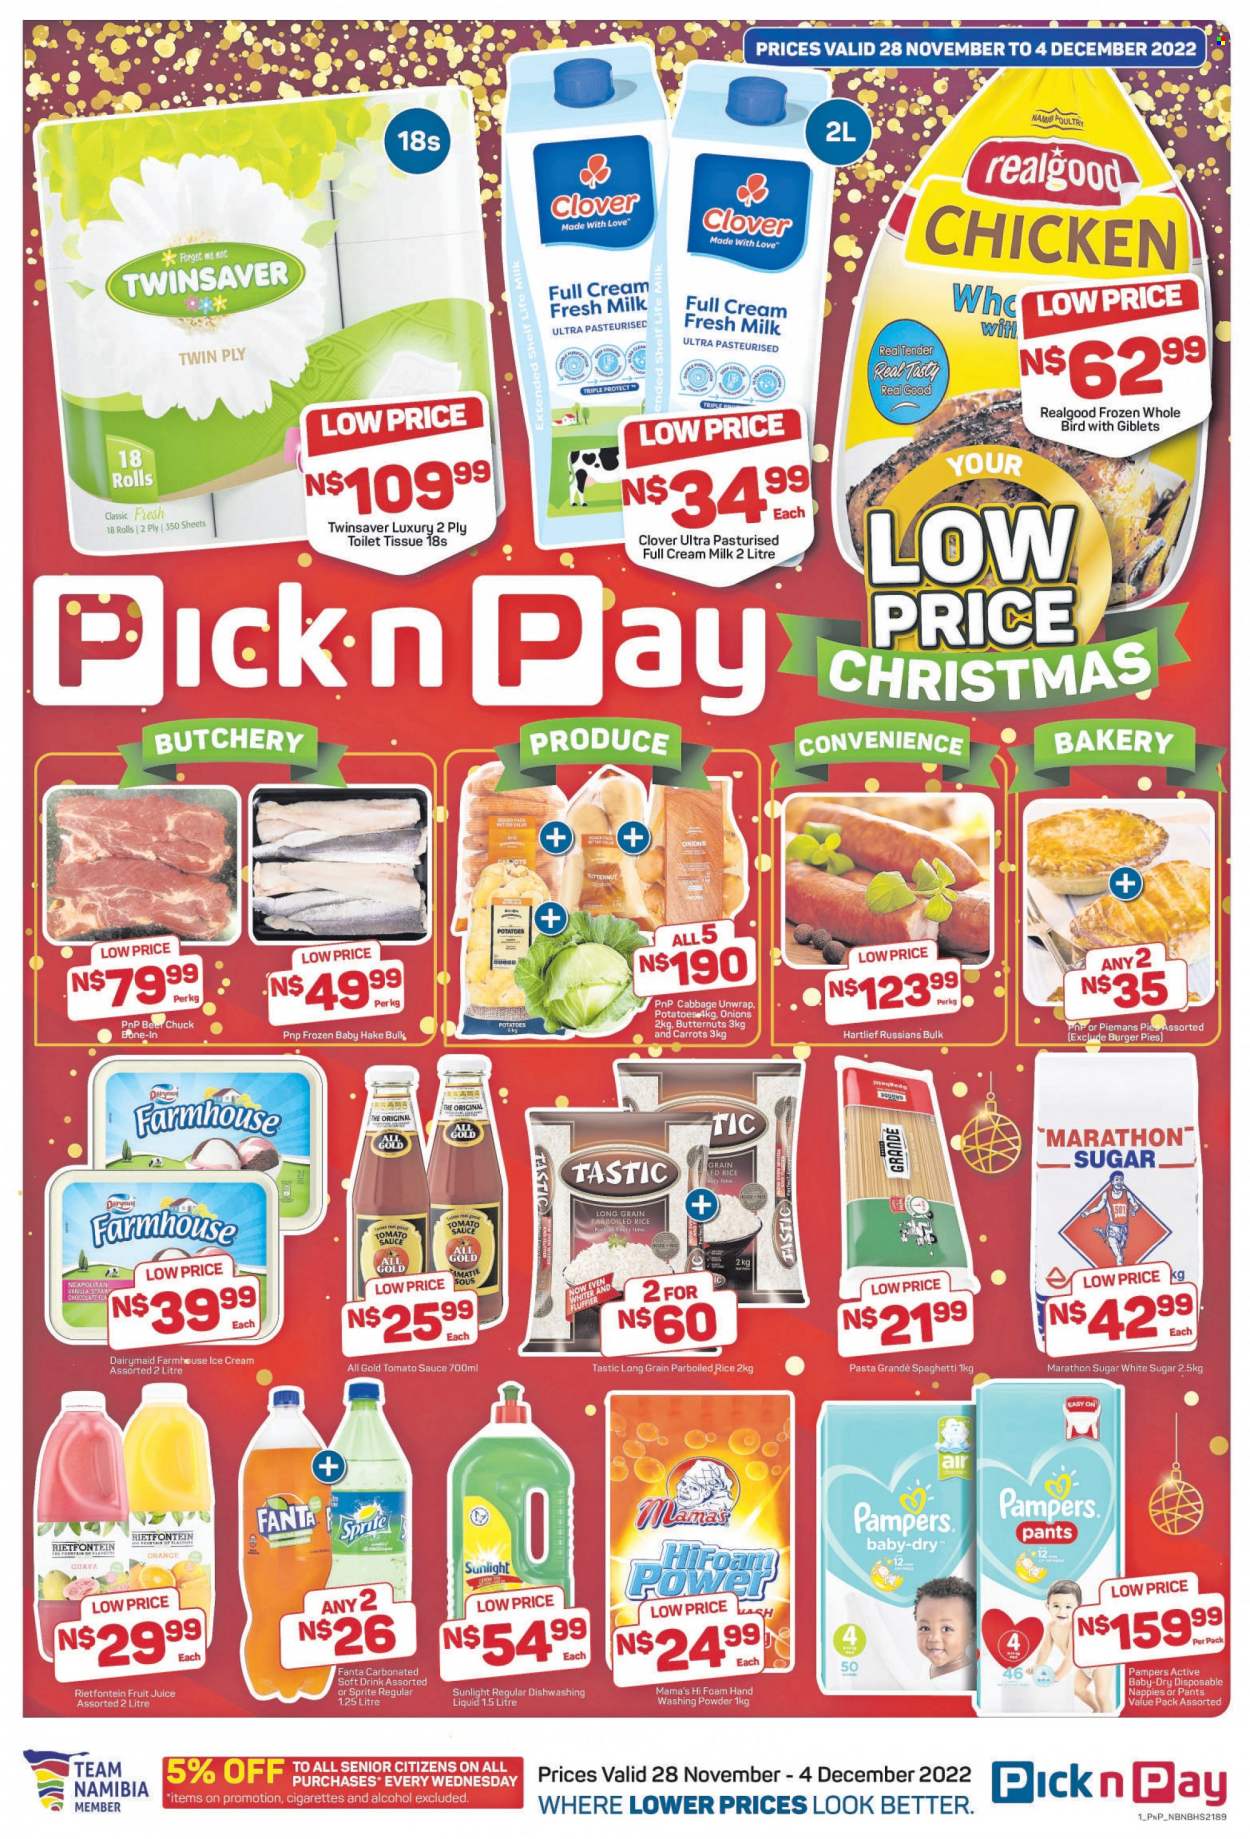 thumbnail - Pick n Pay catalogue  - 28/11/2022 - 04/12/2022 - Sales products - cabbage, carrots, potatoes, guava, oranges, hake, spaghetti, pasta, sauce, hamburger, Mama's, Russians, Clover, ice cream, sugar, tomato sauce, rice, parboiled rice, Tastic, Pasta Grandé, Sprite, Fanta, fruit juice, juice, soft drink, carbonated soft drink, alcohol, beer, Pampers, pants, nappies, laundry powder, Sunlight, dishwashing liquid. Page 1.